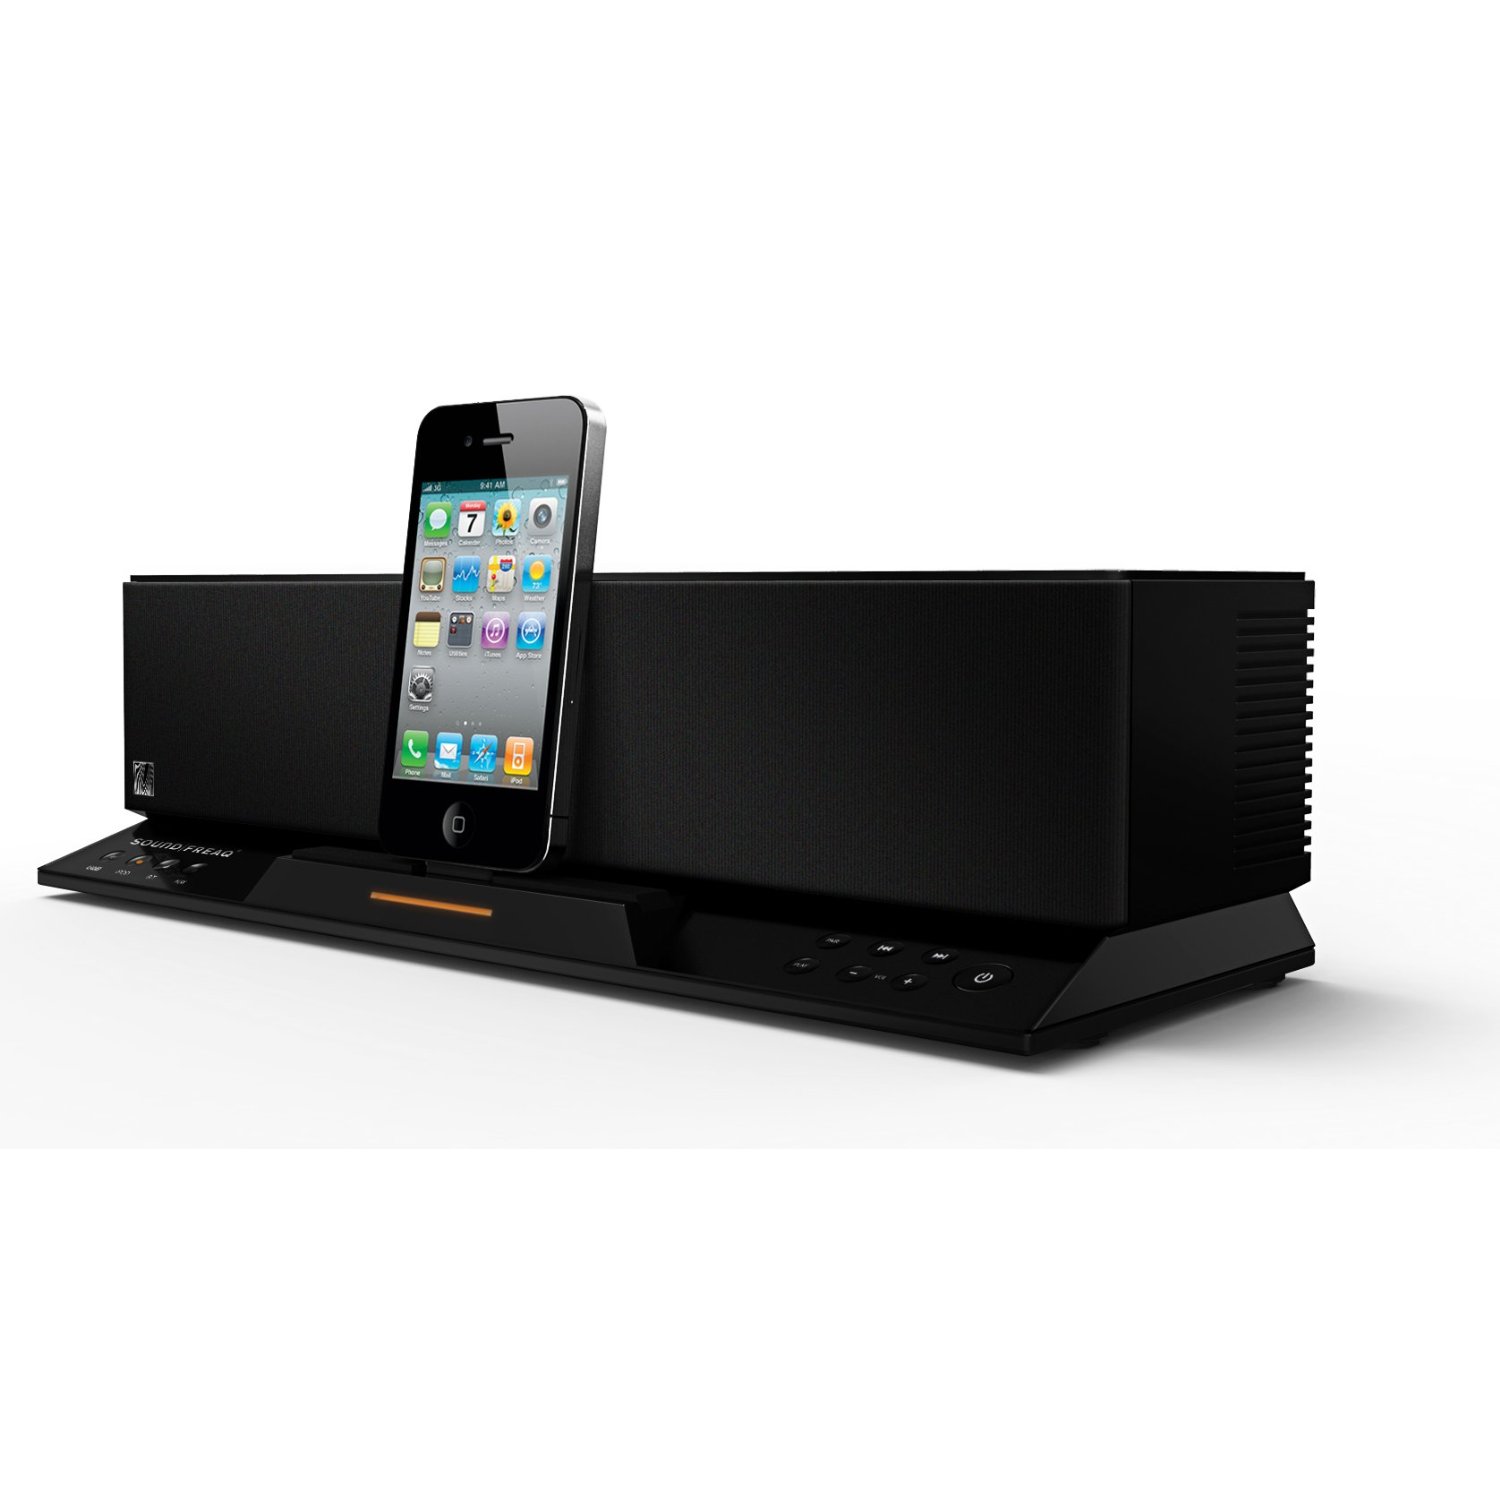 http://thetechjournal.com/wp-content/uploads/images/1107/1310022586-soundfreaq-sfq02-sound-step-bluetooth-wireless-audio-system-2.jpg